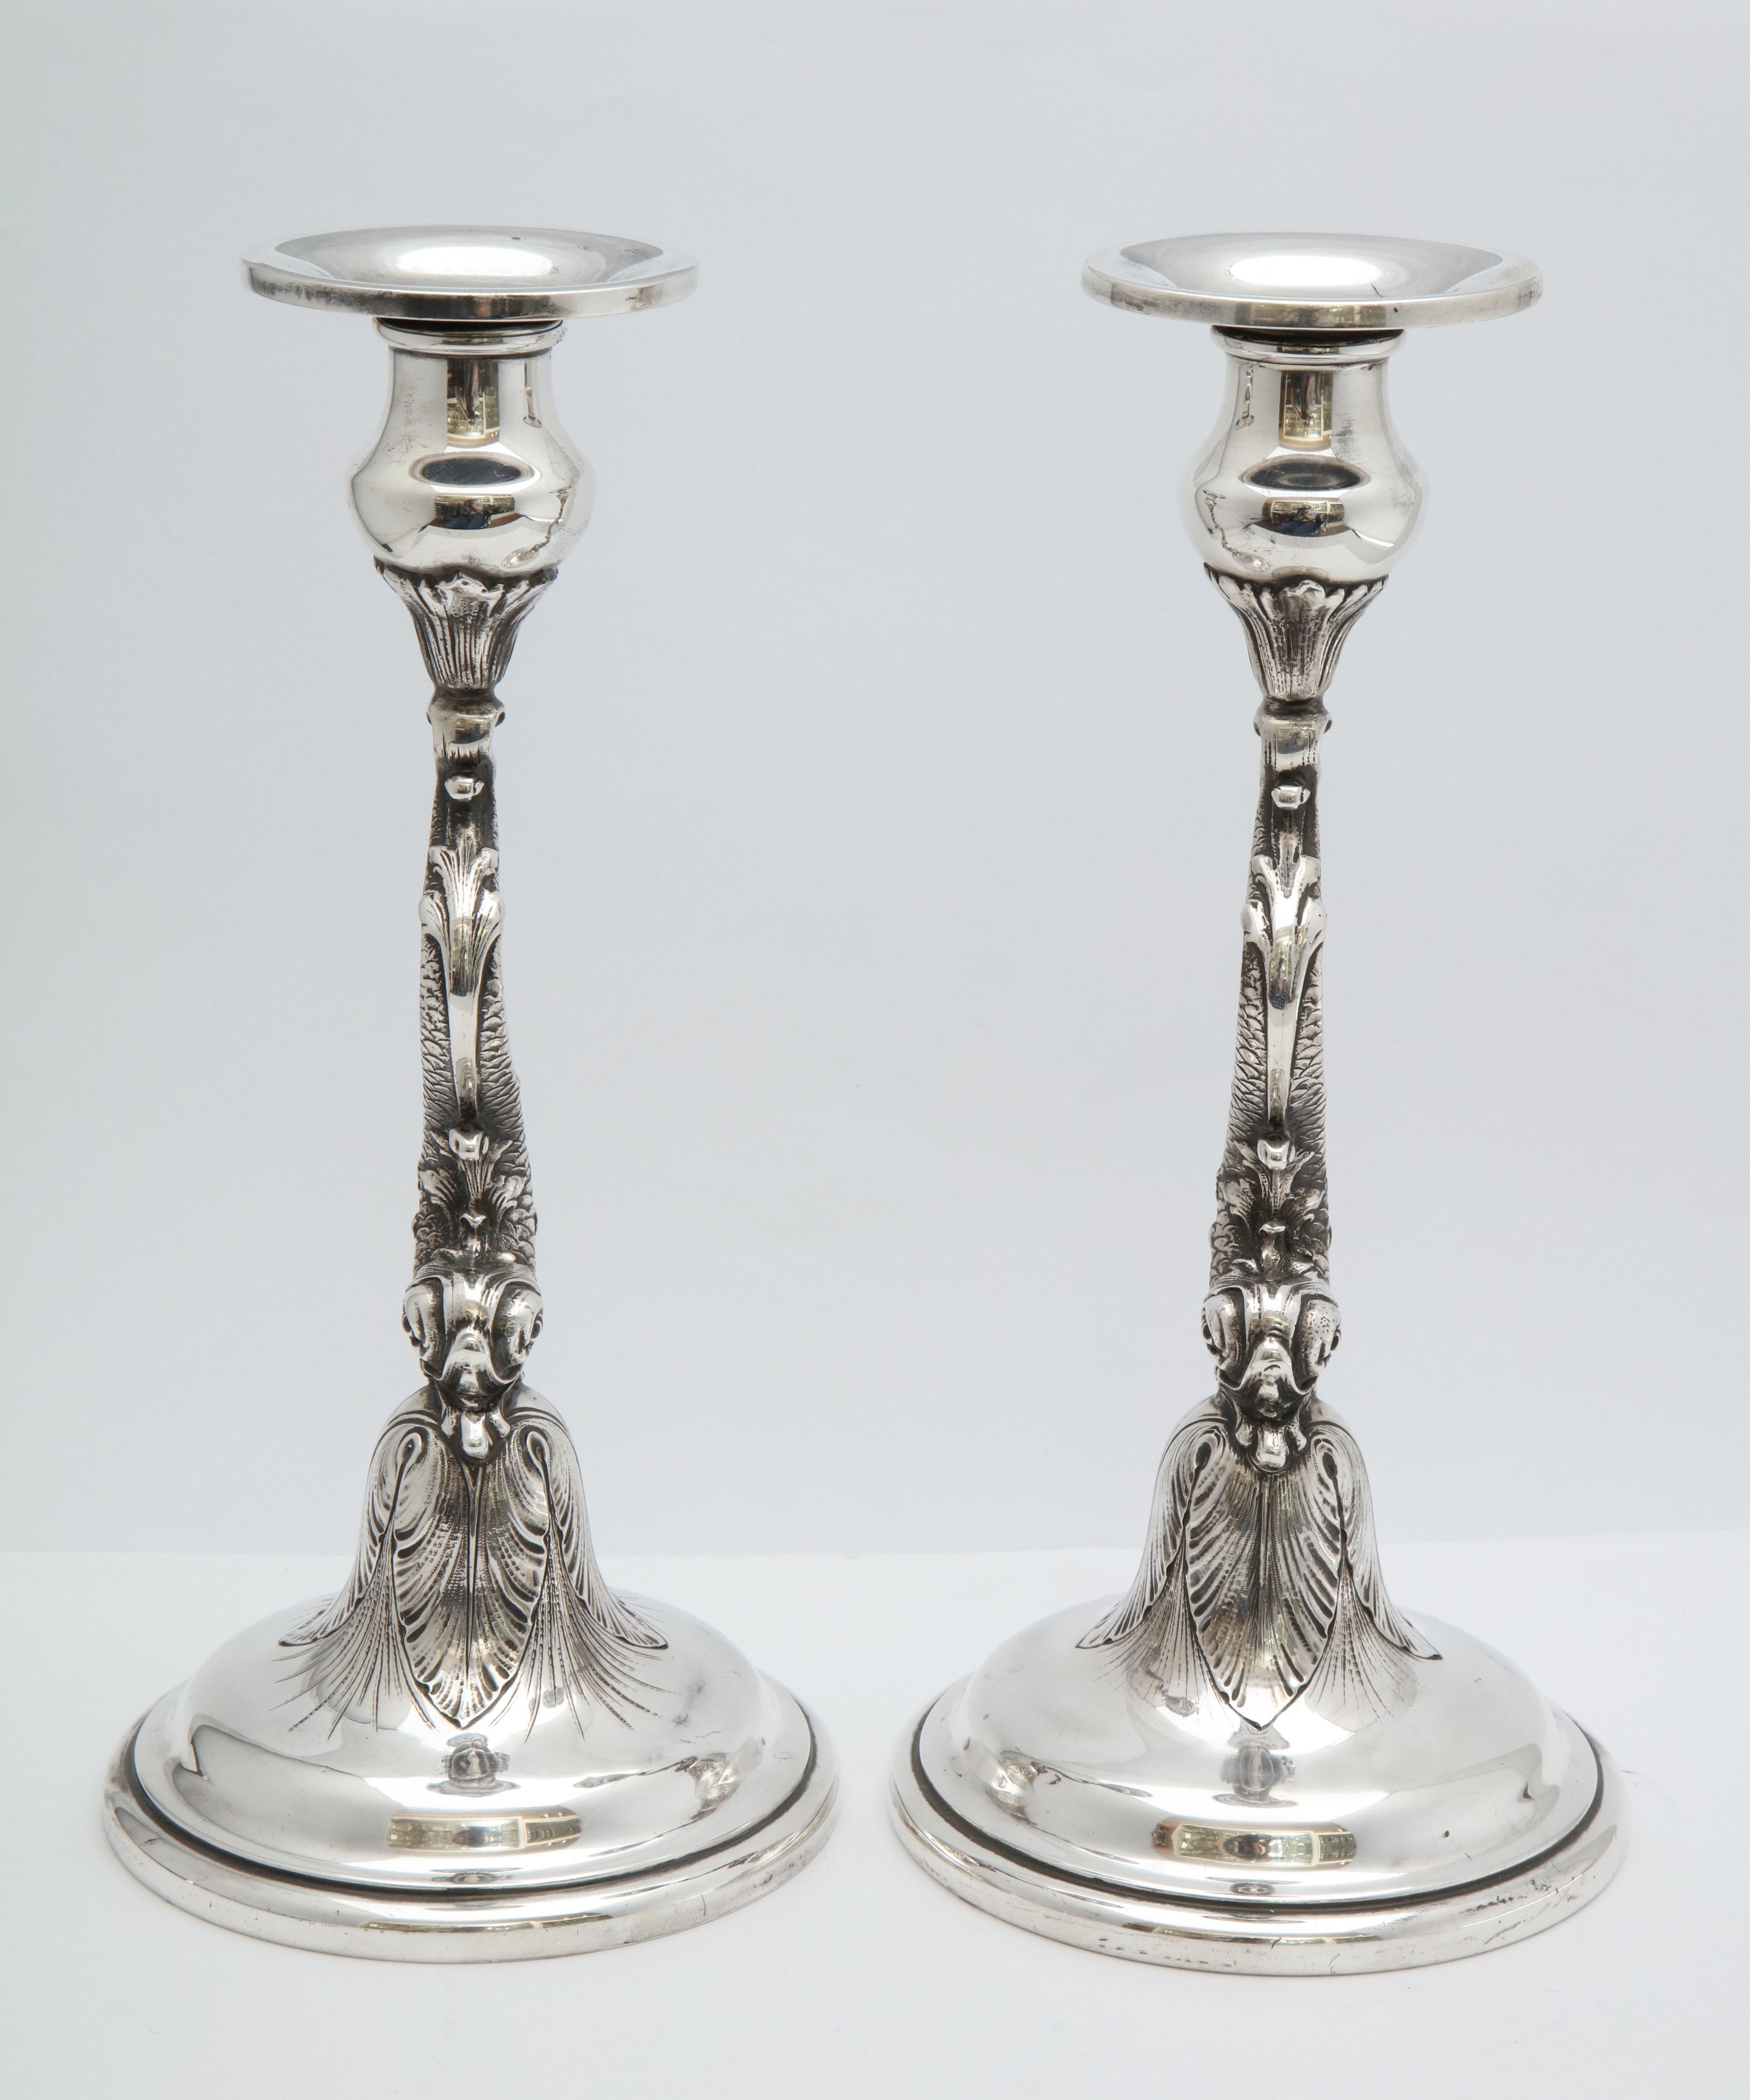 Pair of Art Nouveau Sterling Silver Dolphin-Form Candlesticks by Spaulding 2